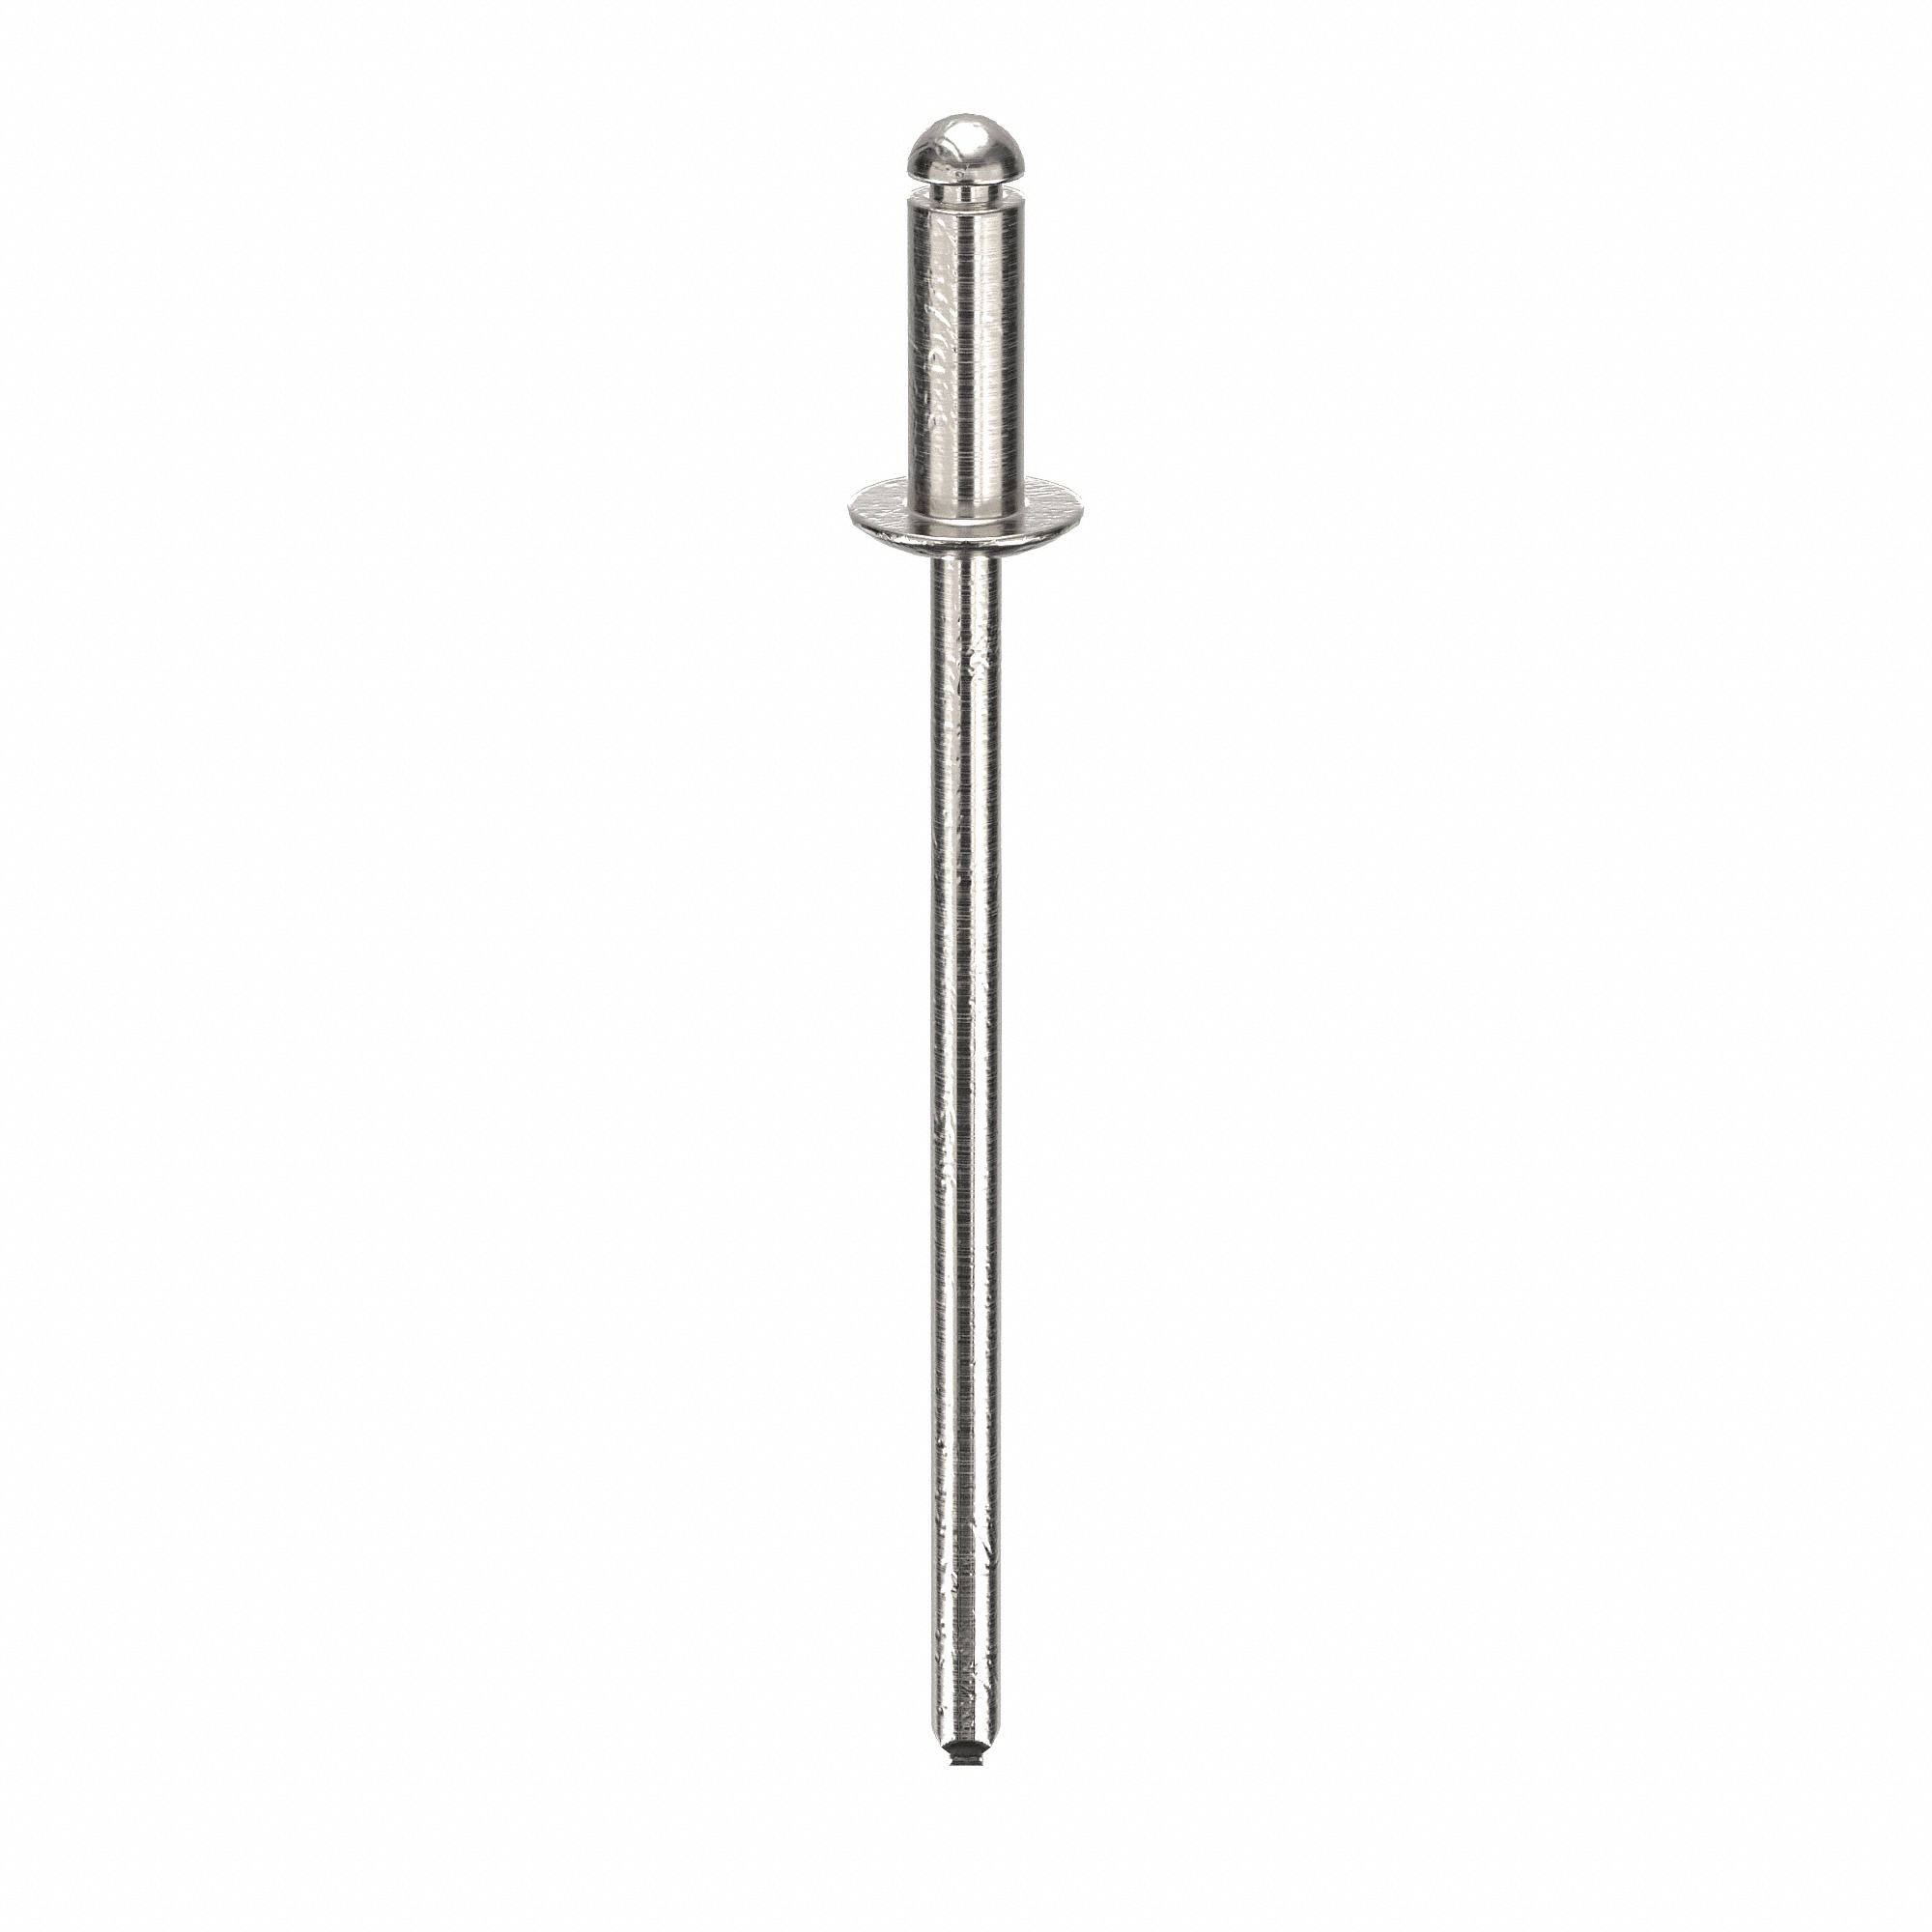 Structural POP Rivets Stainless Steel- 0.080-0.375 Grip 8-6 1/4" Qty-25 